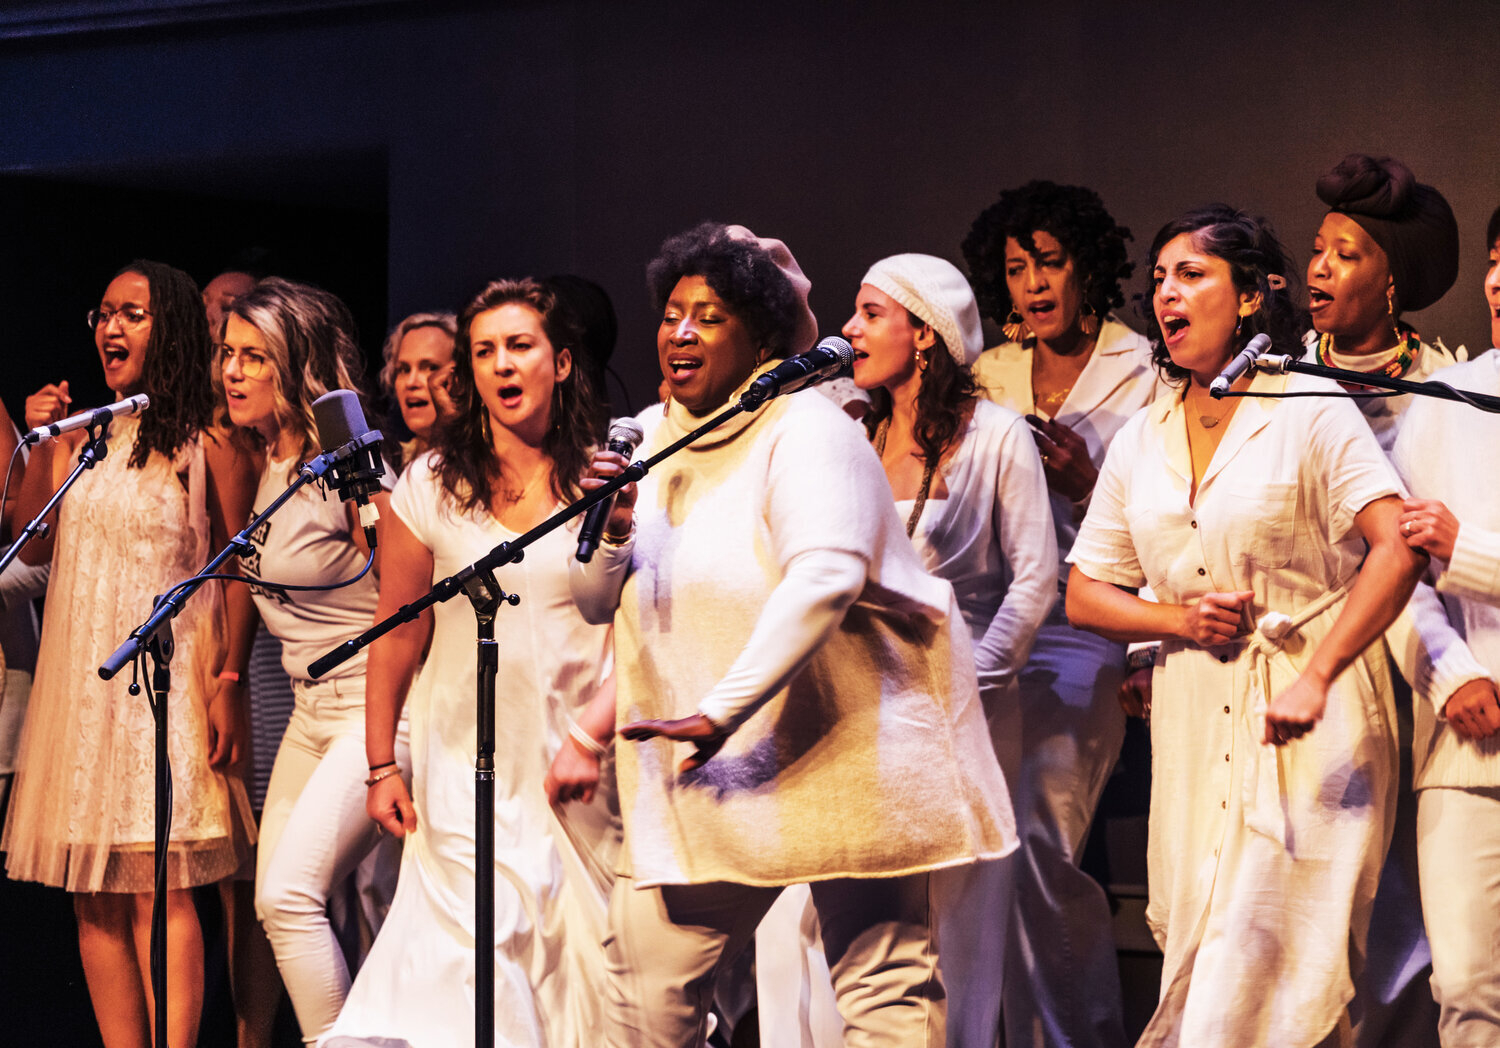  Our Special Musical Guests The Resistance Revival Chorus delivered an  incredible and inspiring performance evoking power to cause progressive  change in the world. 